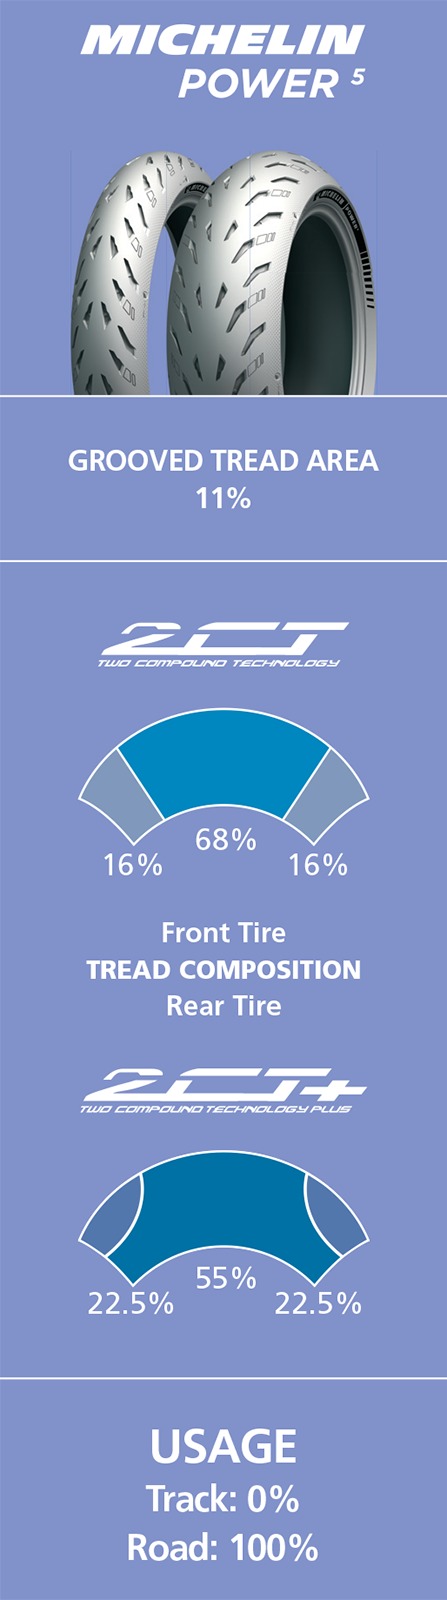 190/50ZR17 (73W) Power 5 Rear Motorcycle Tire - Click Image to Close